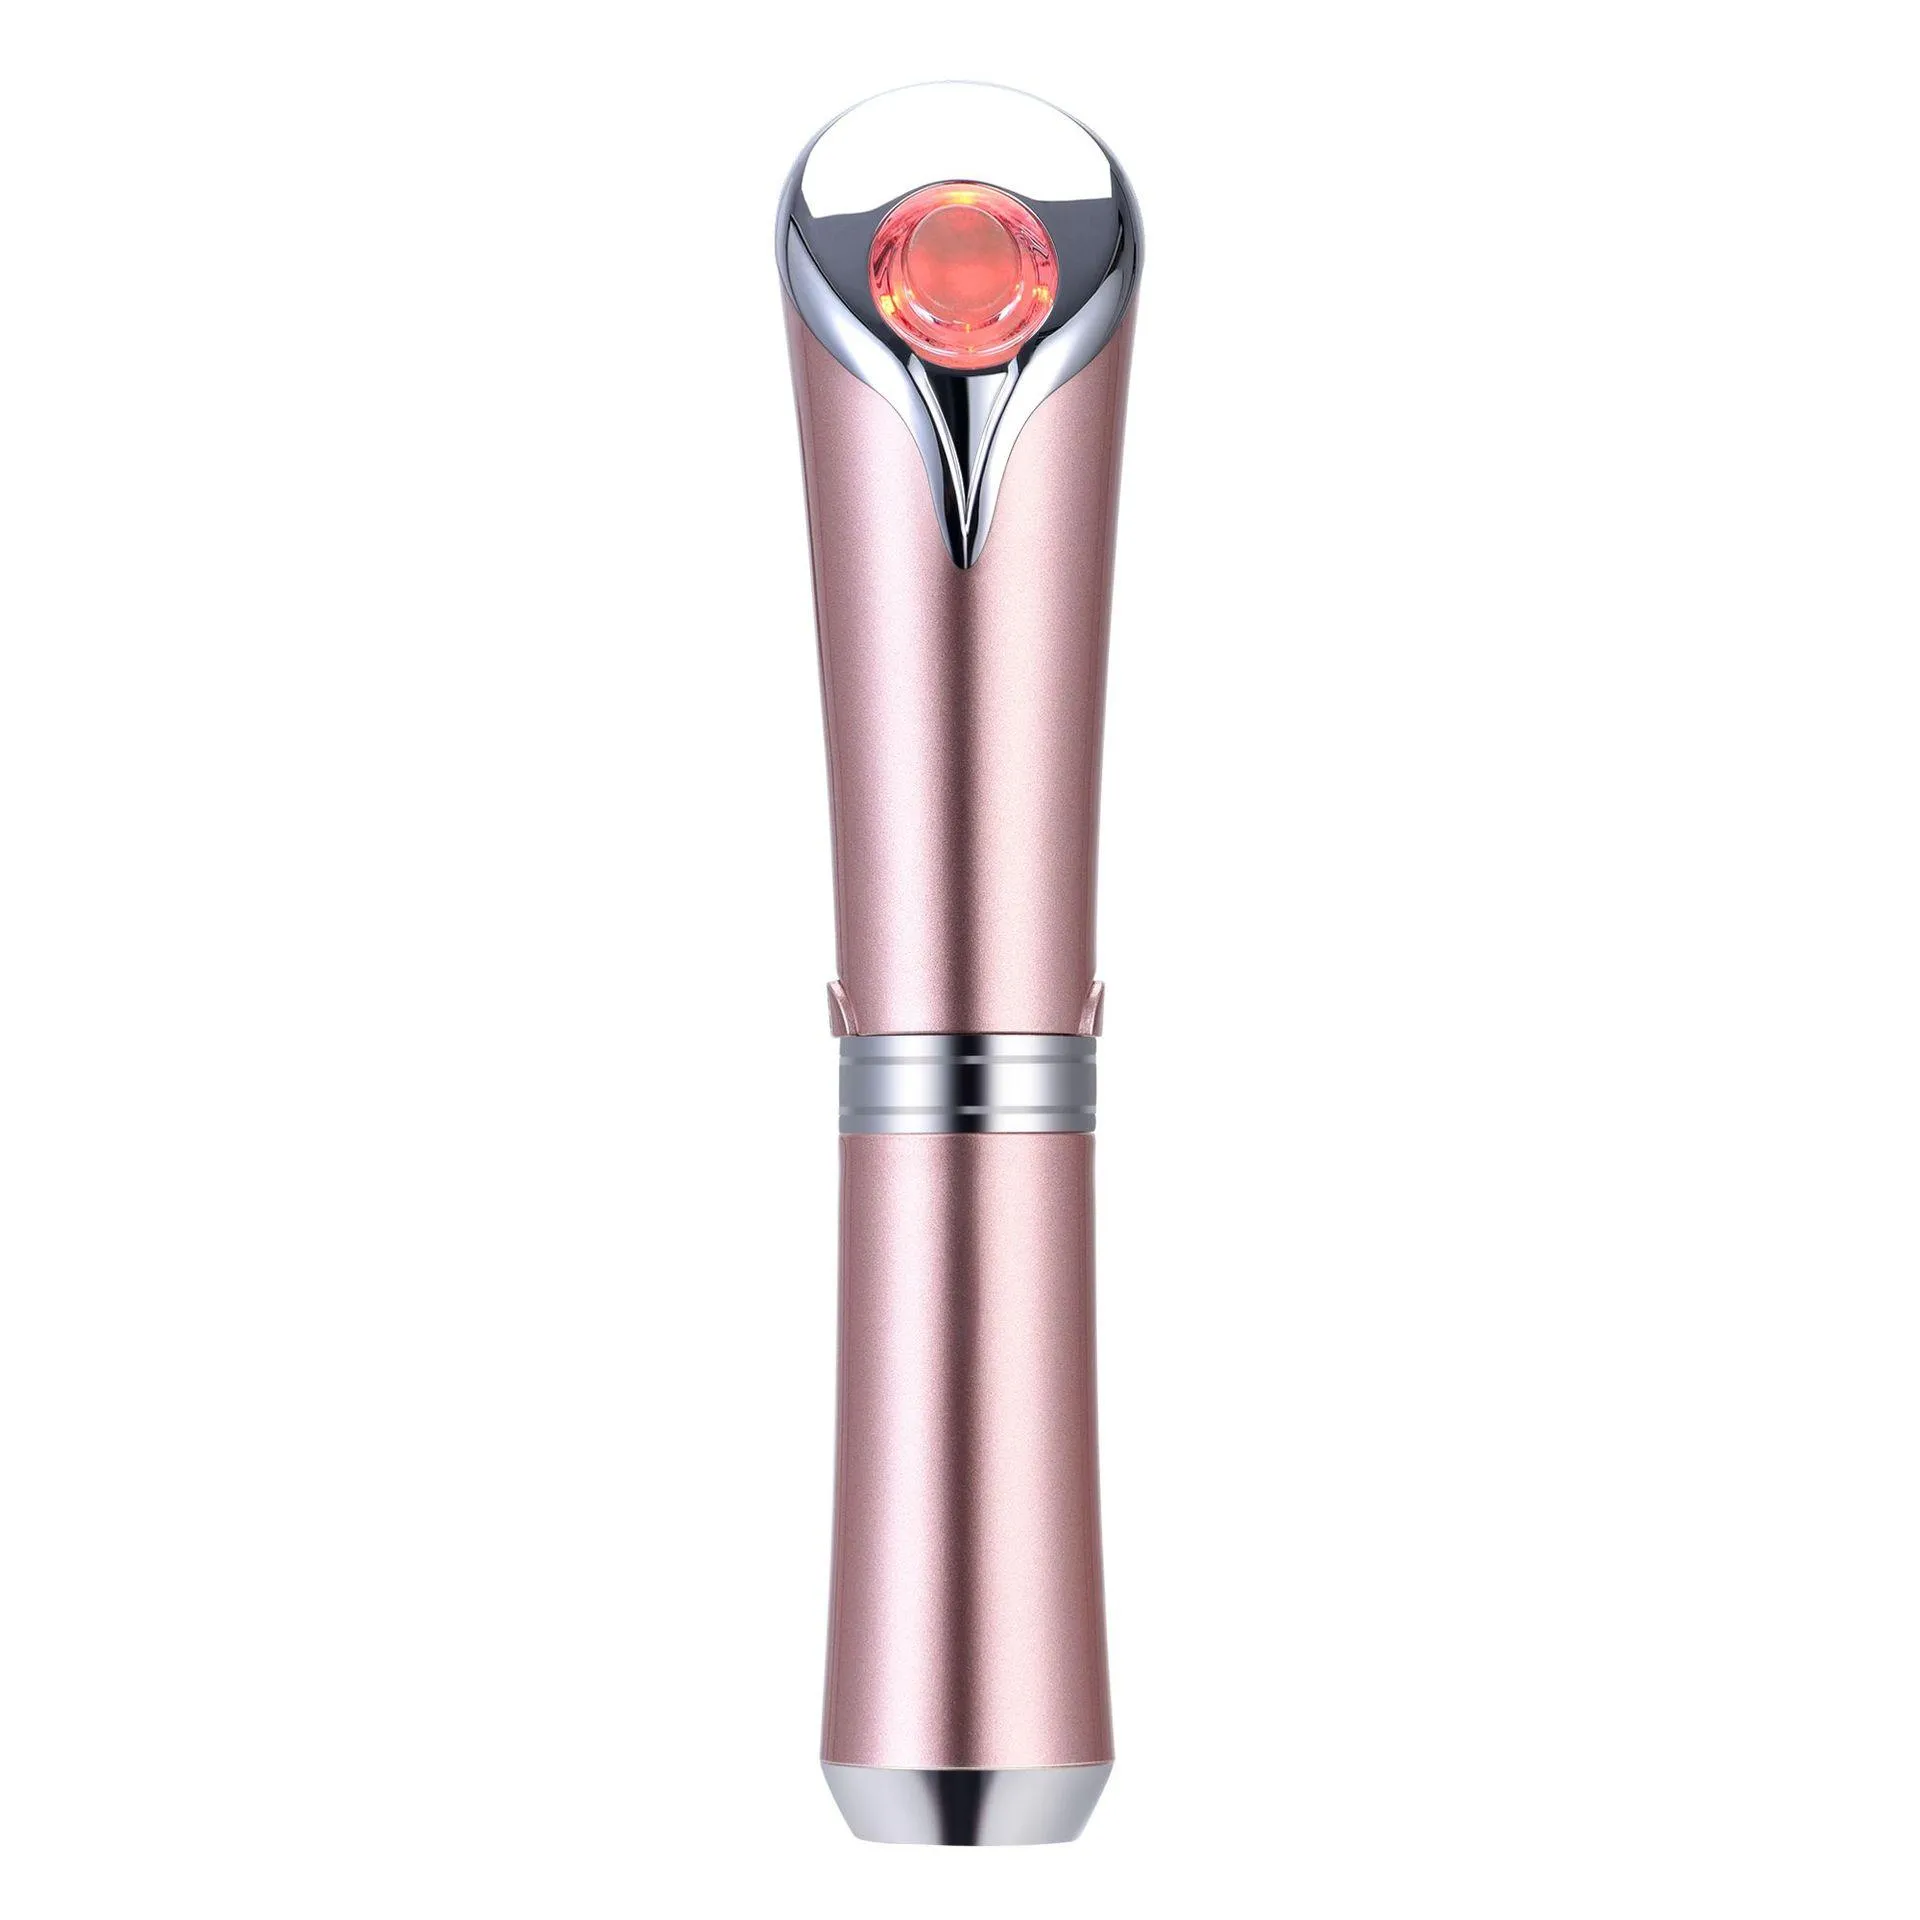 electric beauty eye instrument pen stick vibration heating handheld eye massager into the color jade beauty instrument